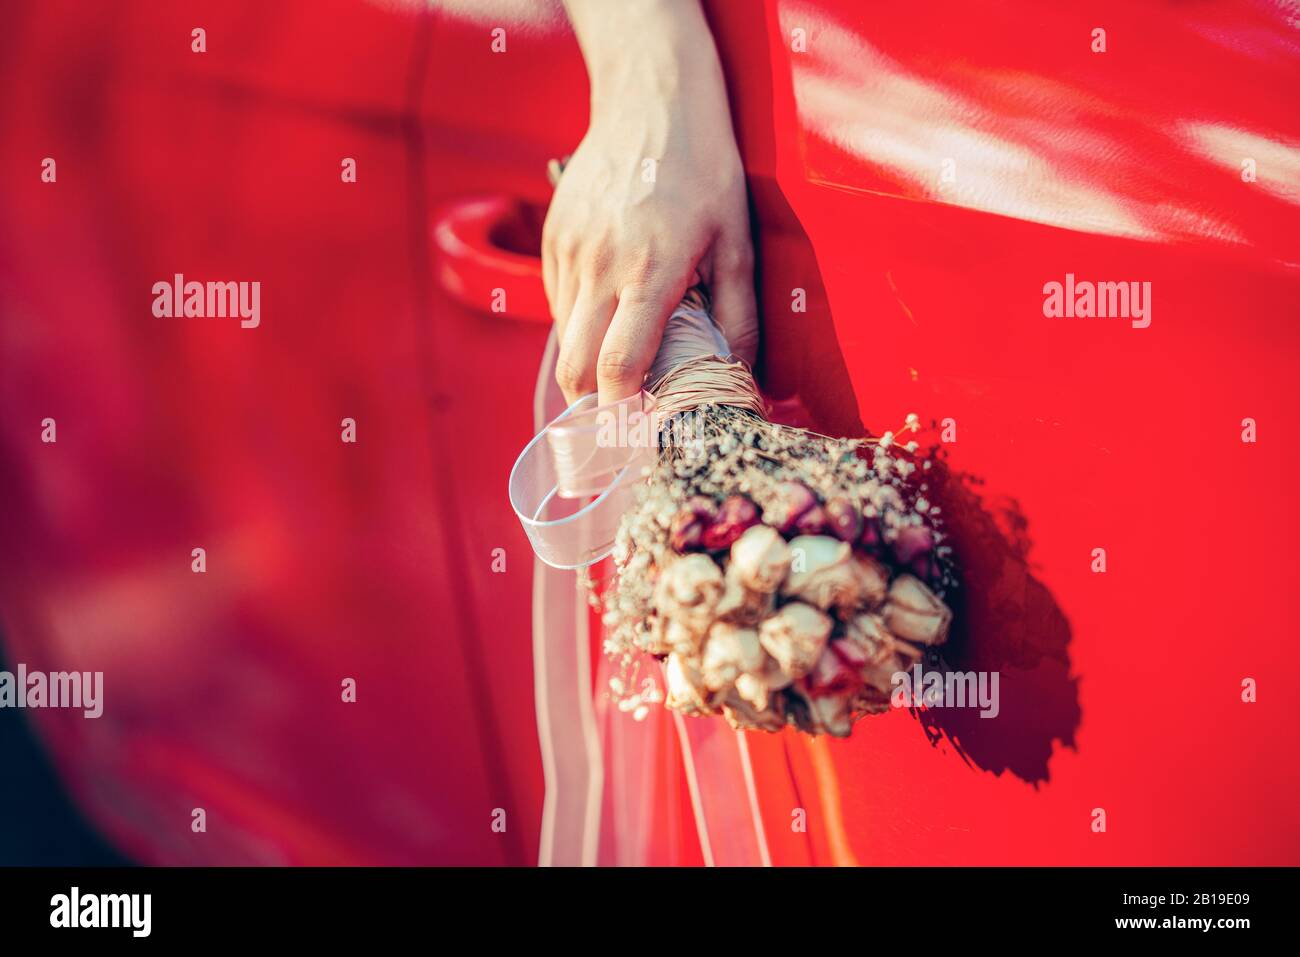 Bride holding the wedding bouquet and wave it from the window of the red car Stock Photo